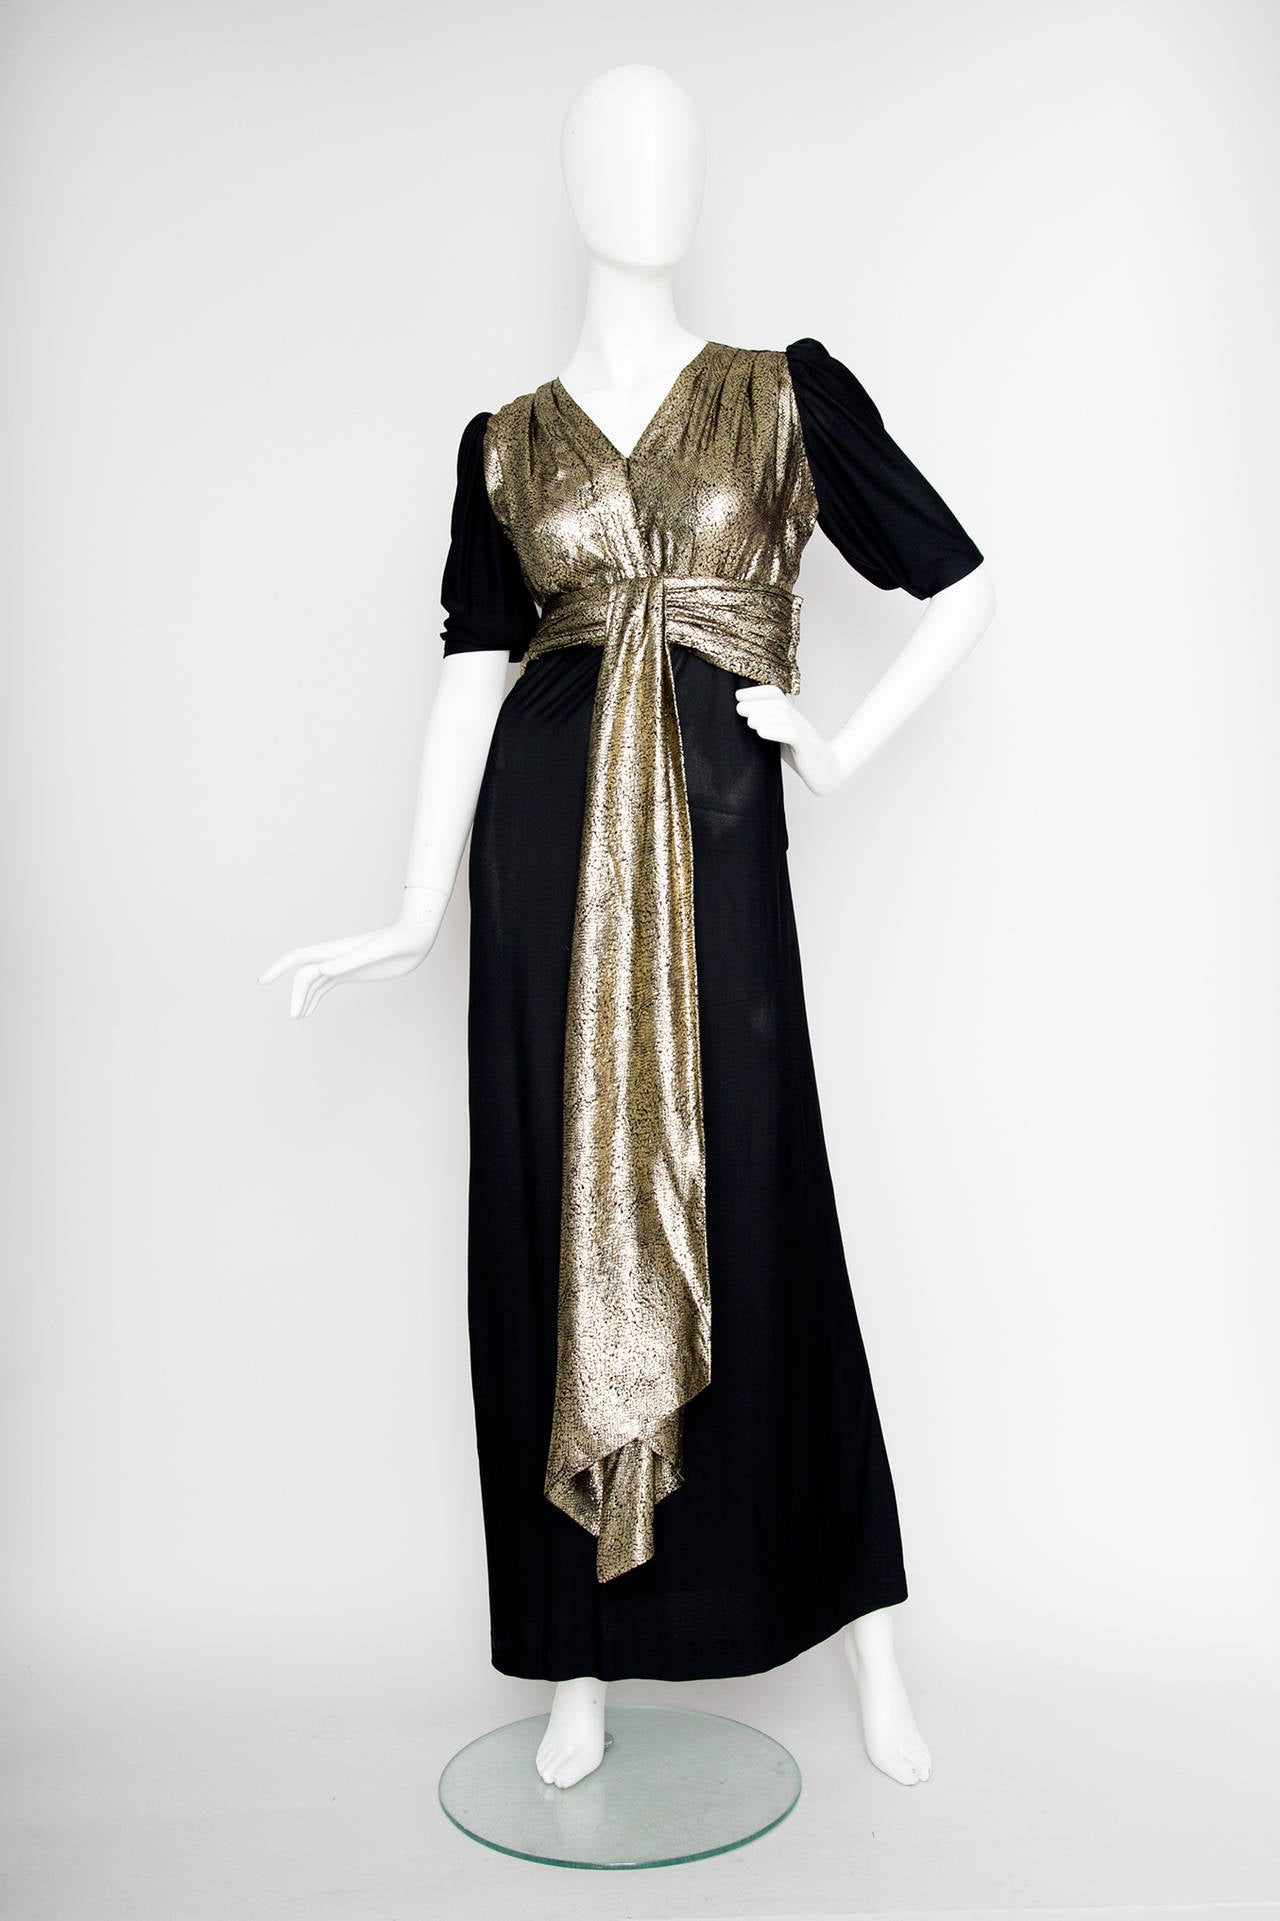 A 1970s silk jersey Yves Saint Laurent Rive Gauche black floor length evening dress with a gold-lamé top with a v-neckline, short sleeves and a detachable gold sash gently dropping down in the front of the dress.  

The dress has a zipper closure